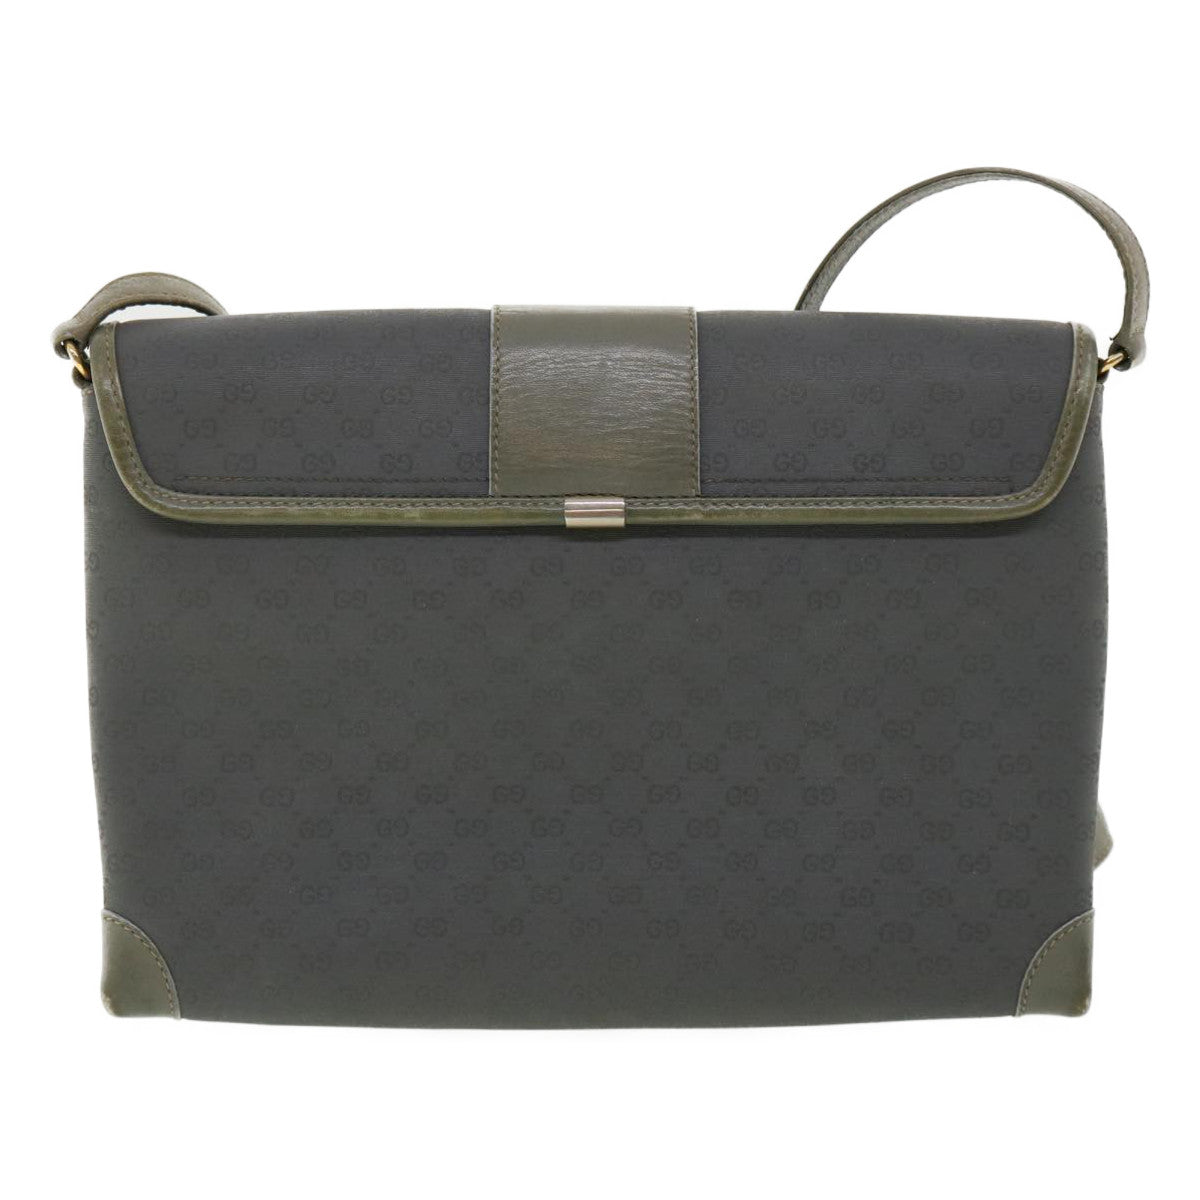 GUCCI Micro GG Canvas Shoulder Bag Gray Auth bs3248 - 0